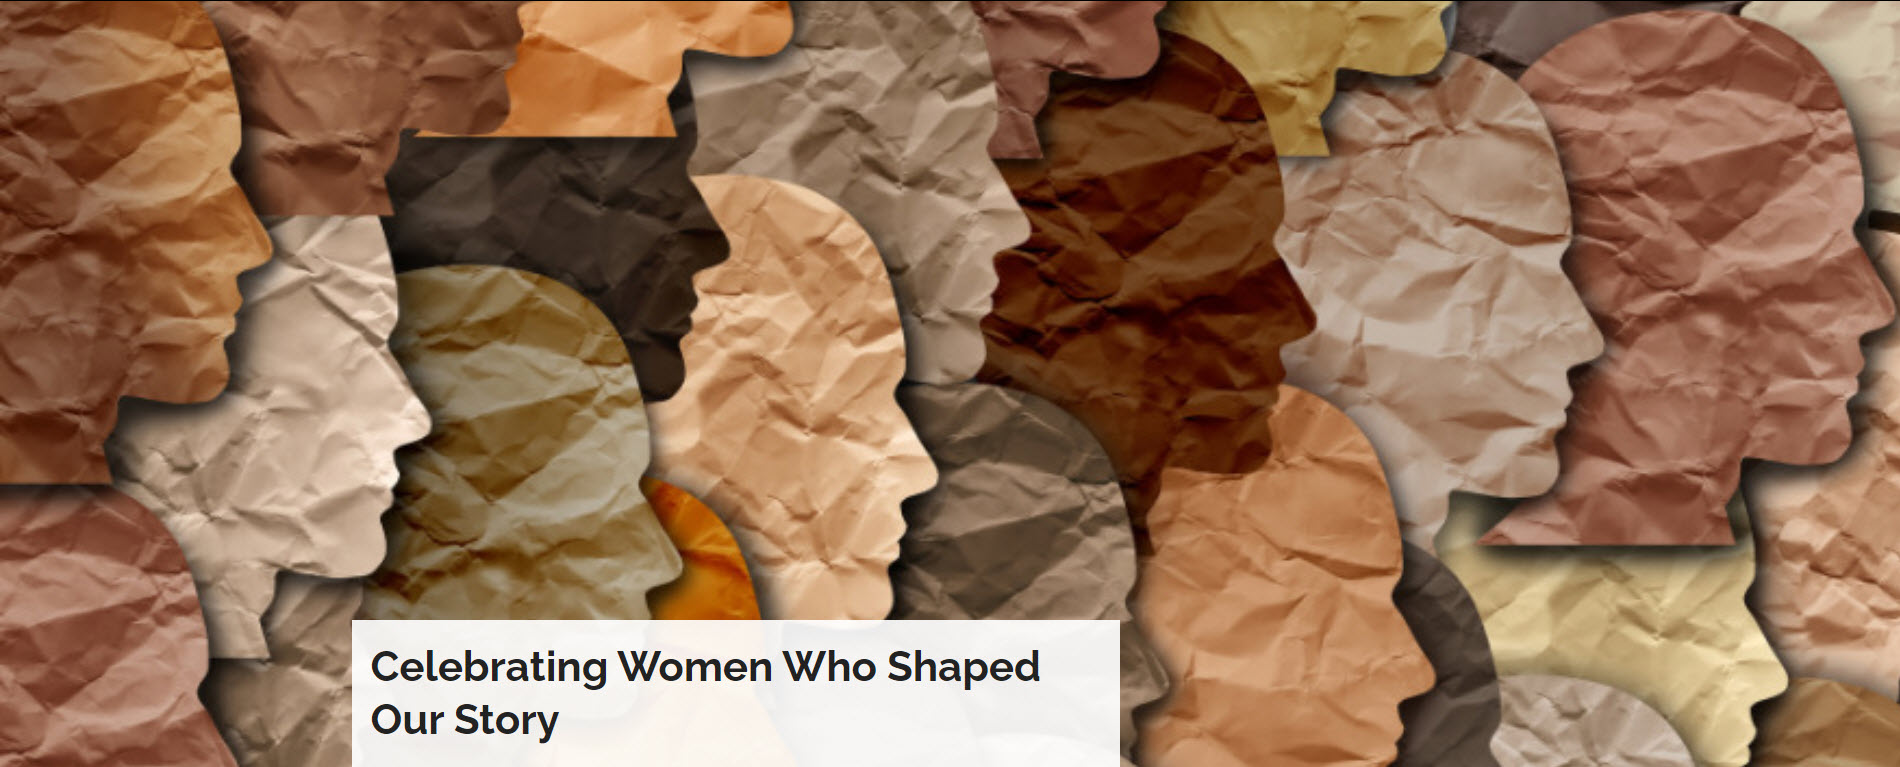 Celebrating Women Who Shaped Our Story